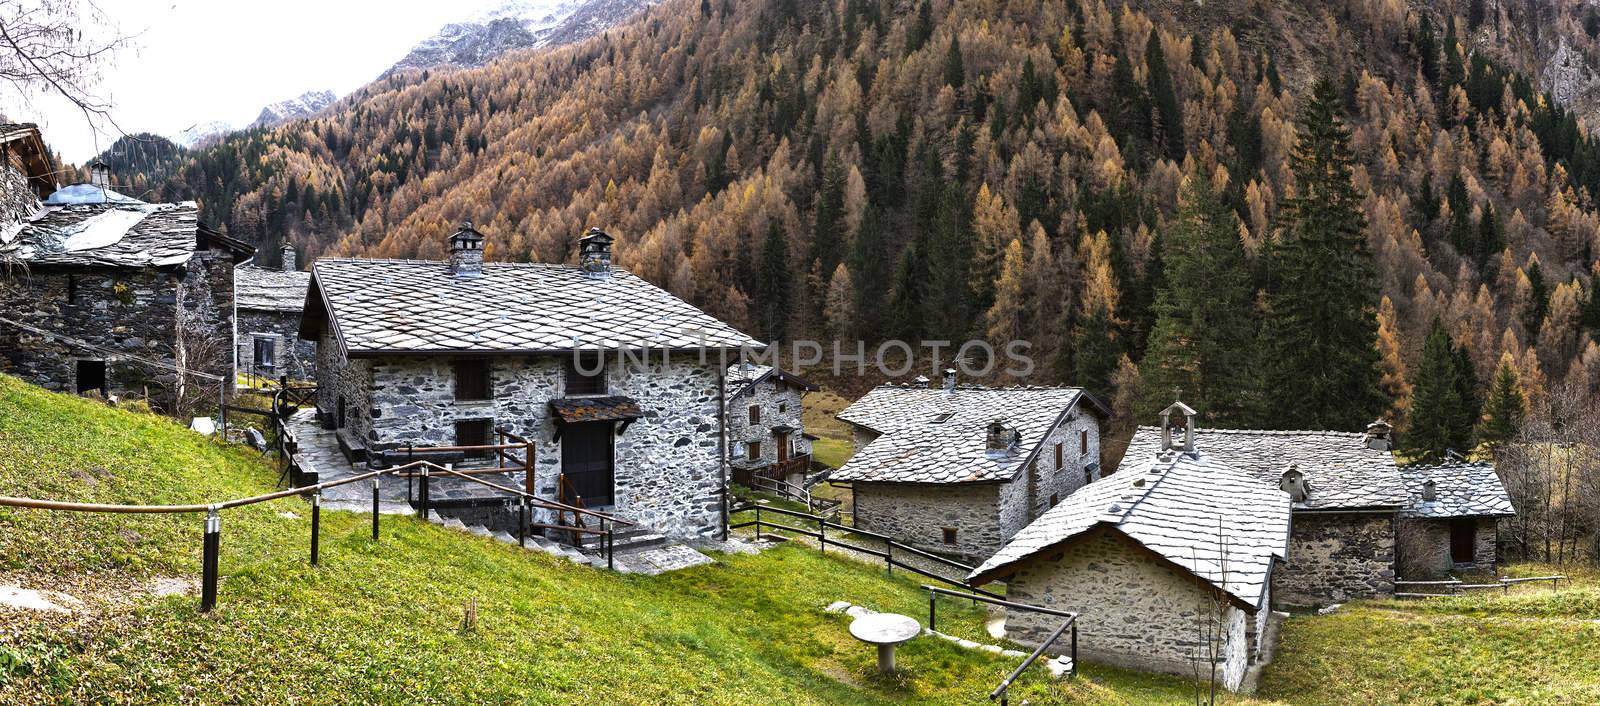 Ancient village in the mountains of Bergamo district, autumn landscape - Italy